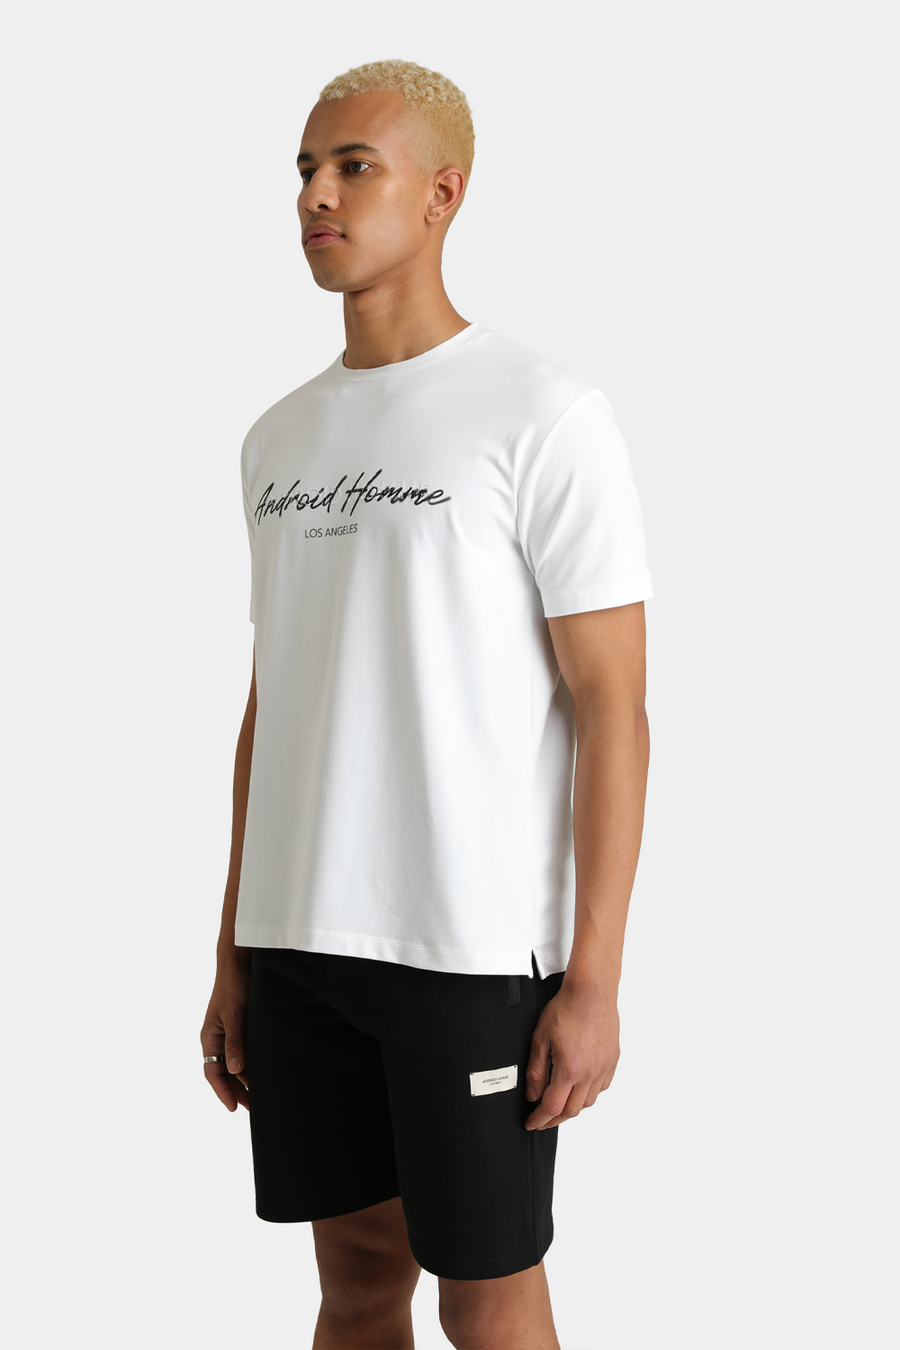 Buy the Android Homme Blur Script T-Shirt in White at Intro. Spend £50 for free UK delivery. Official stockists. We ship worldwide.